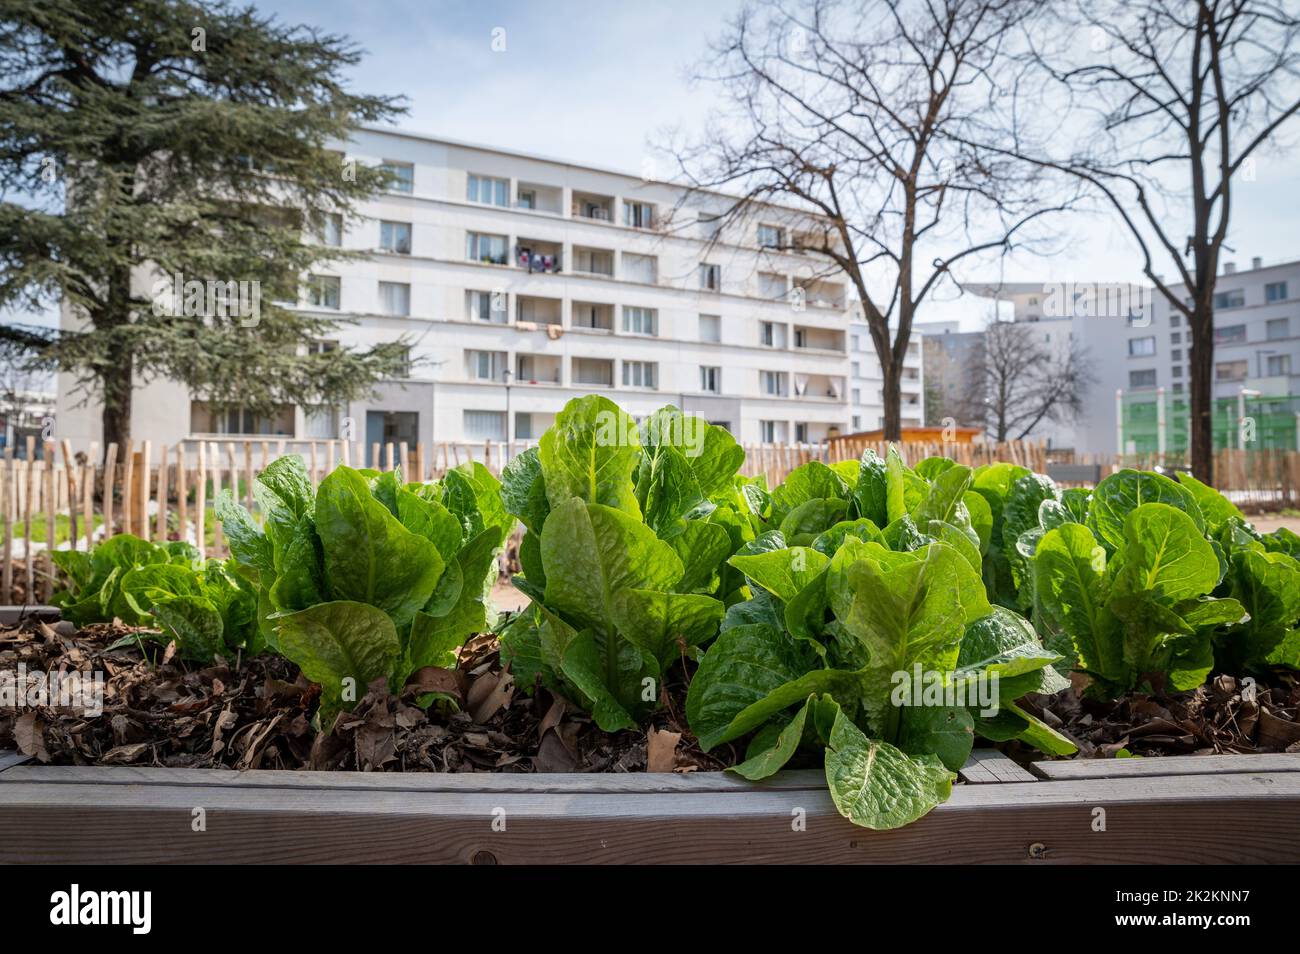 Gardening vegetable container in a city Stock Photo